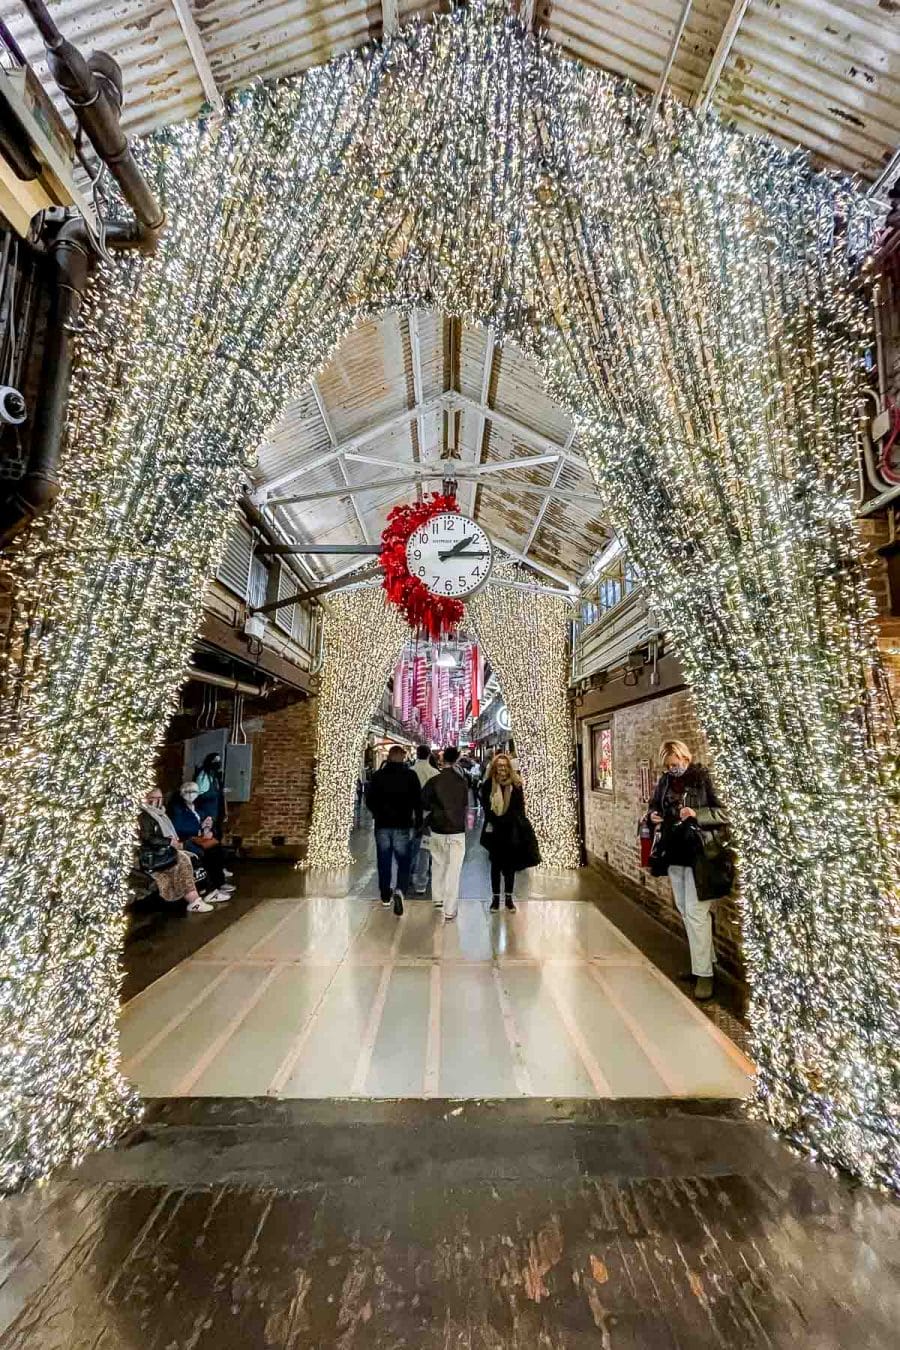 Christmas decorations at the Chelsea Market in New York